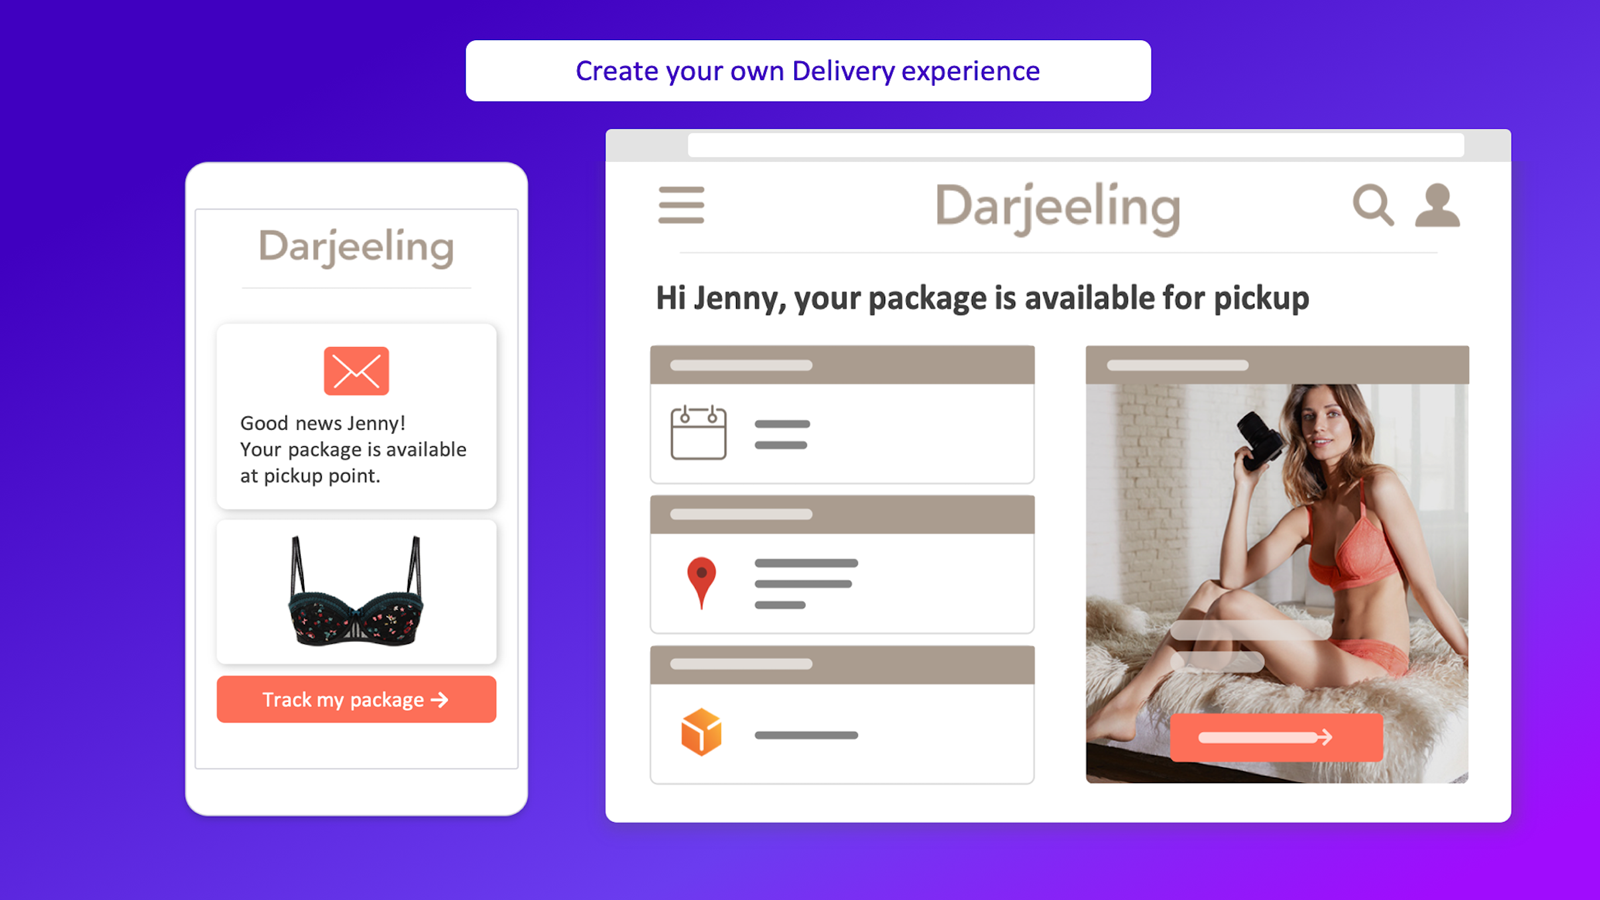 Create your own Delivery experience